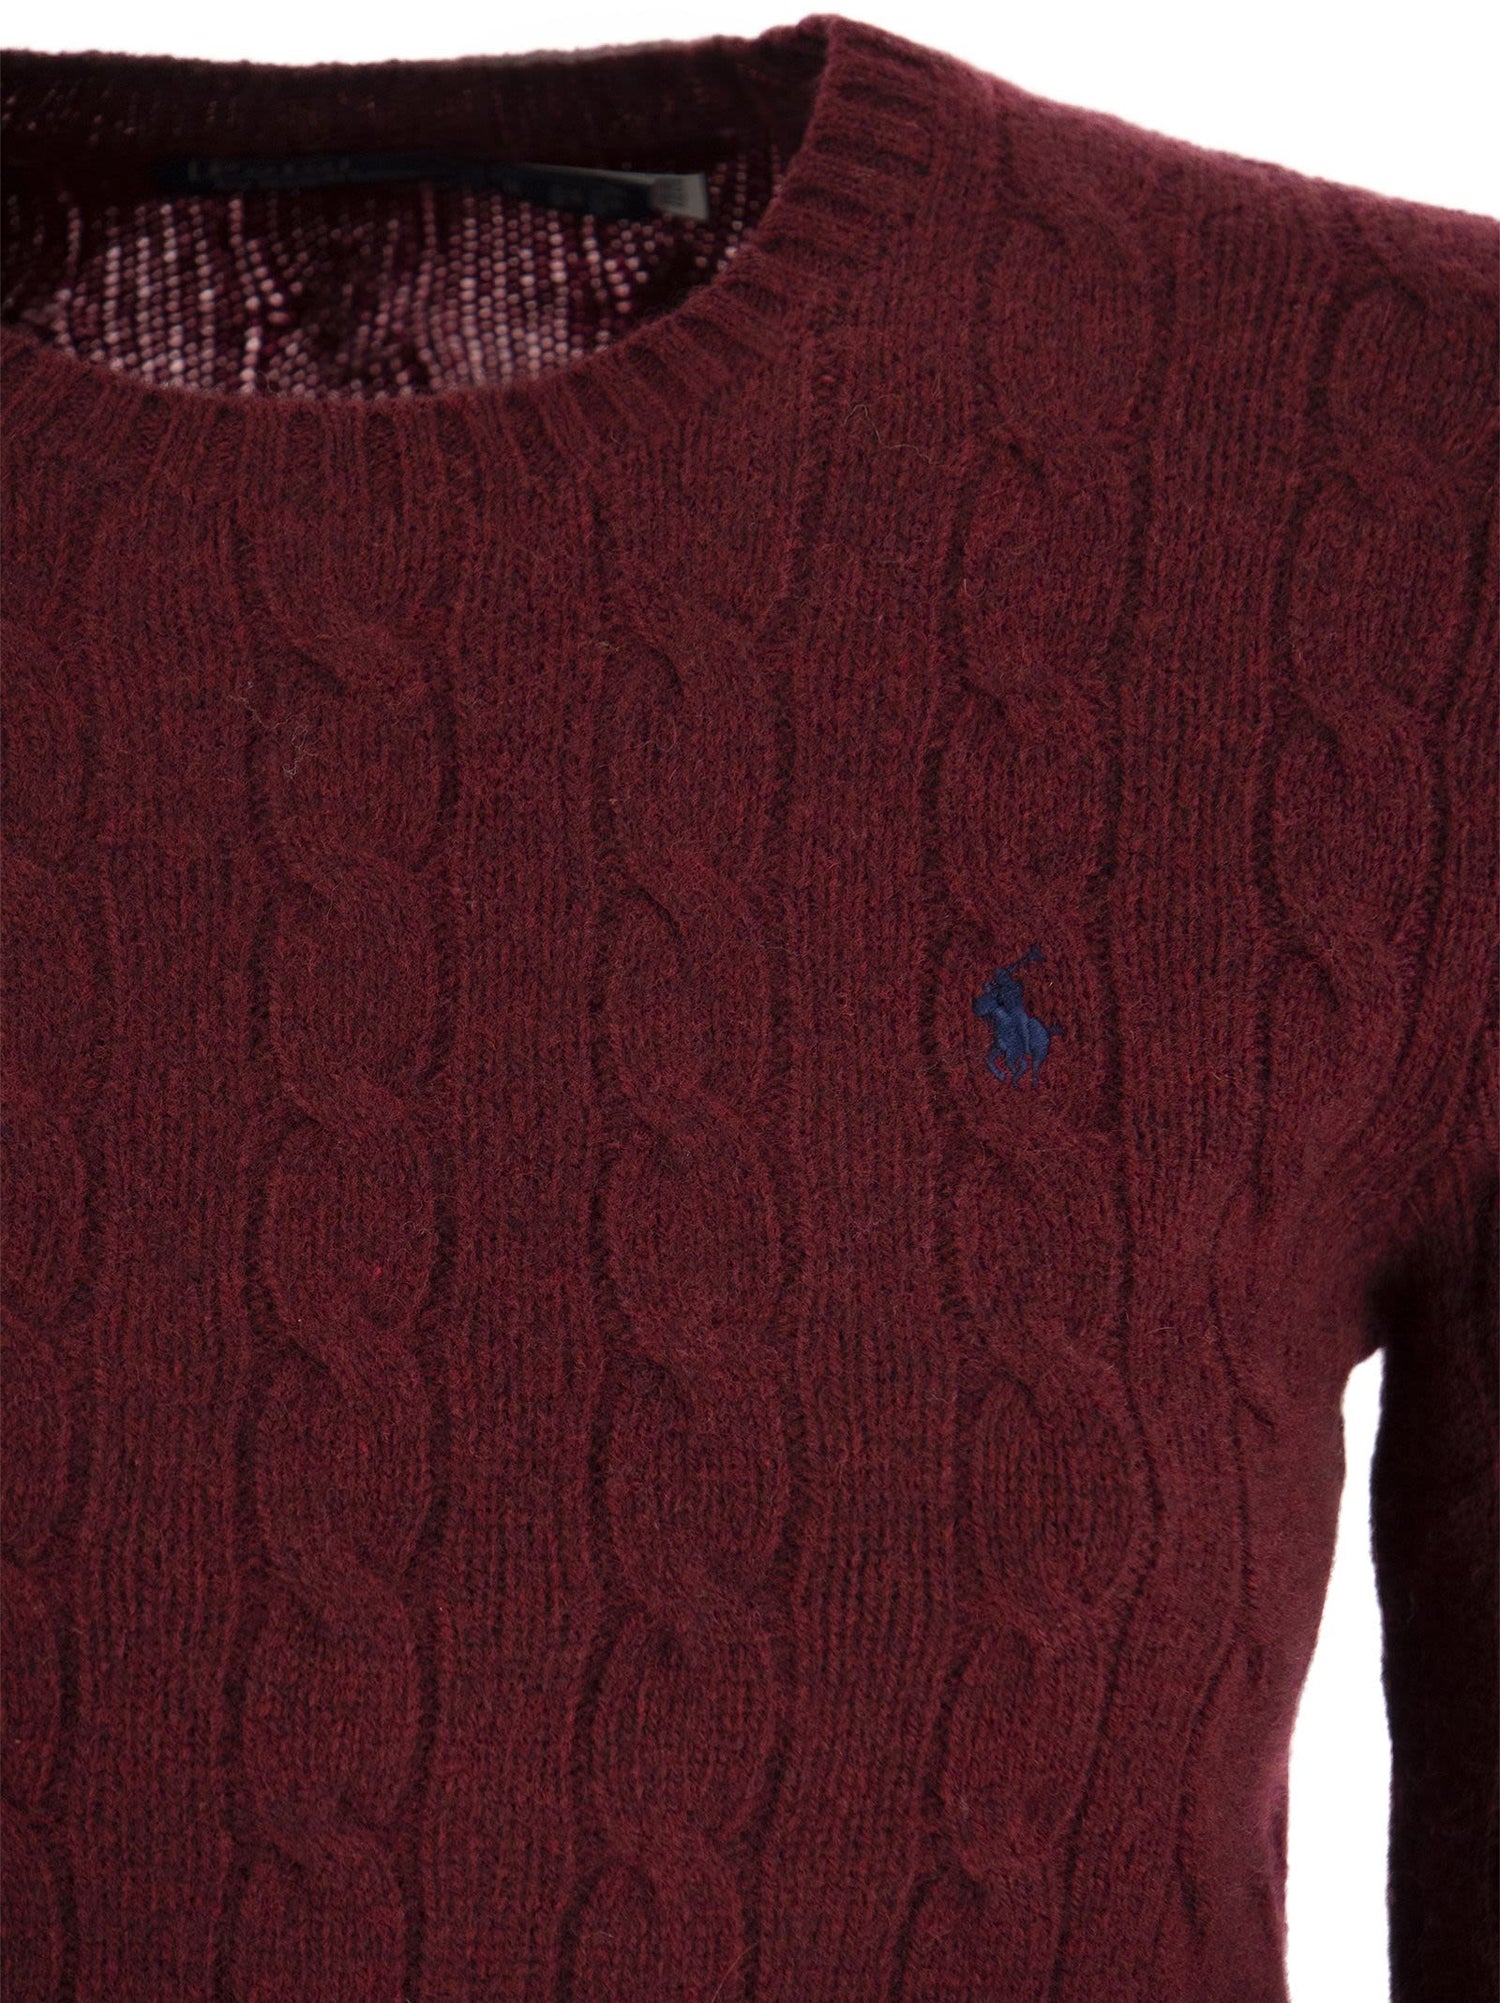 Polo Ralph Lauren Ladies Burgundy Cable Knit Wool-Cashmere Jumper